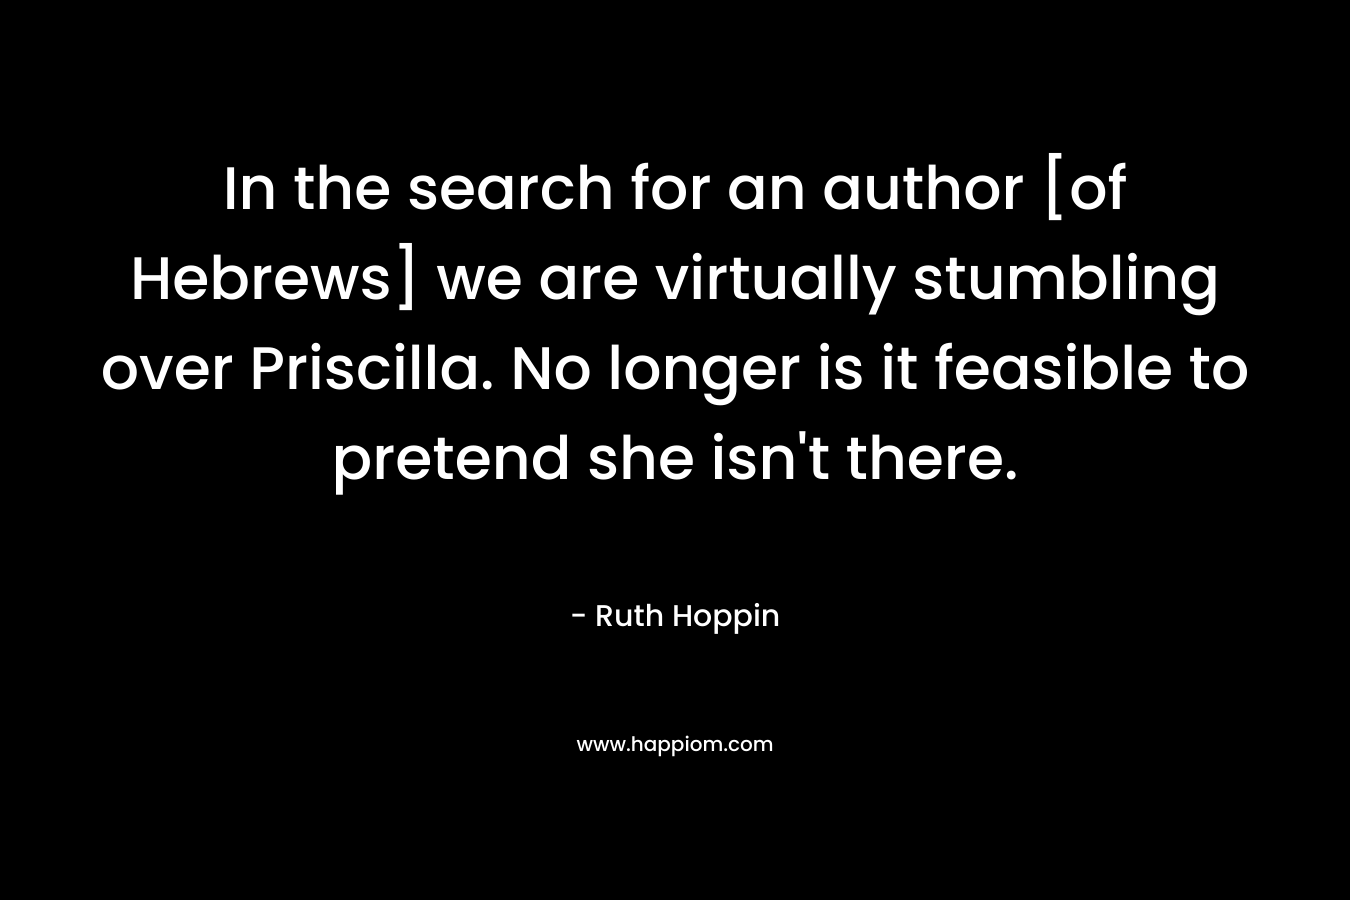 In the search for an author [of Hebrews] we are virtually stumbling over Priscilla. No longer is it feasible to pretend she isn’t there. – Ruth Hoppin